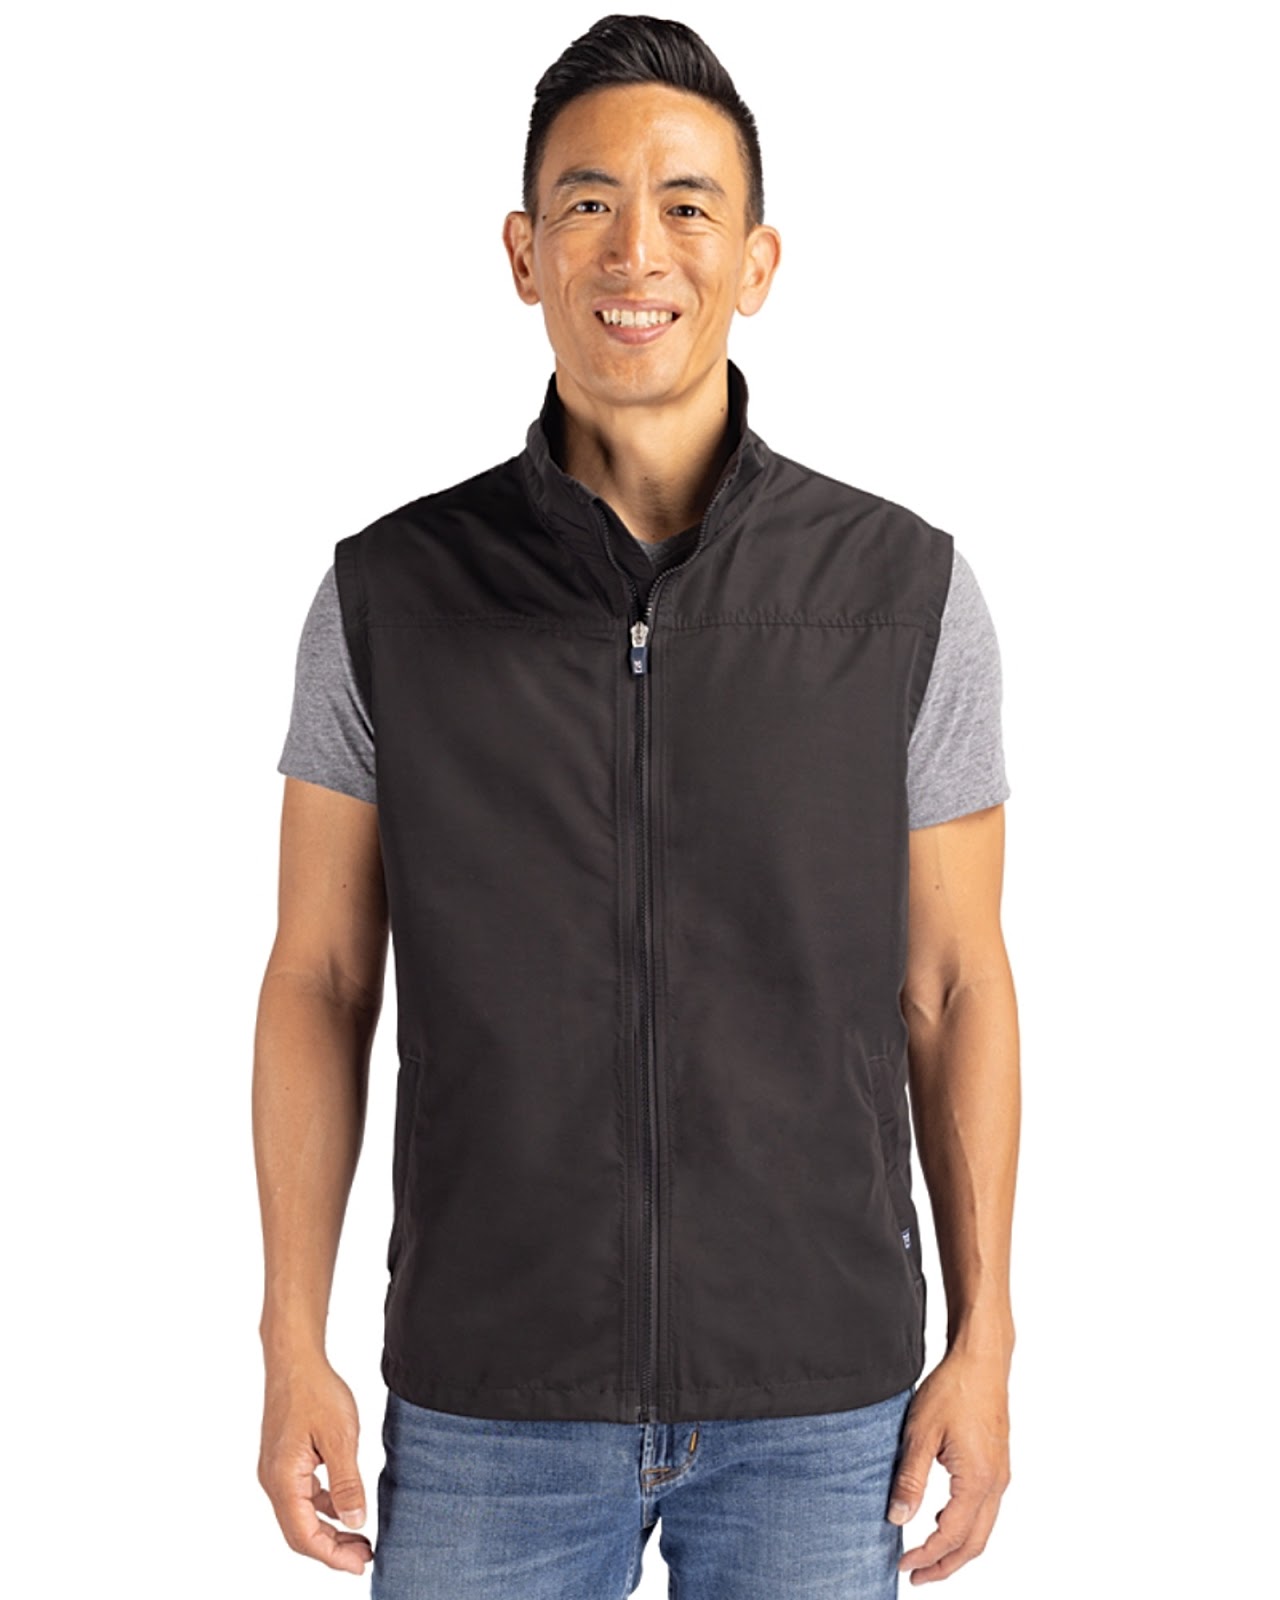 Cutter & Buck Charter Eco Recycled Mens Full-Zip Vest for golfing